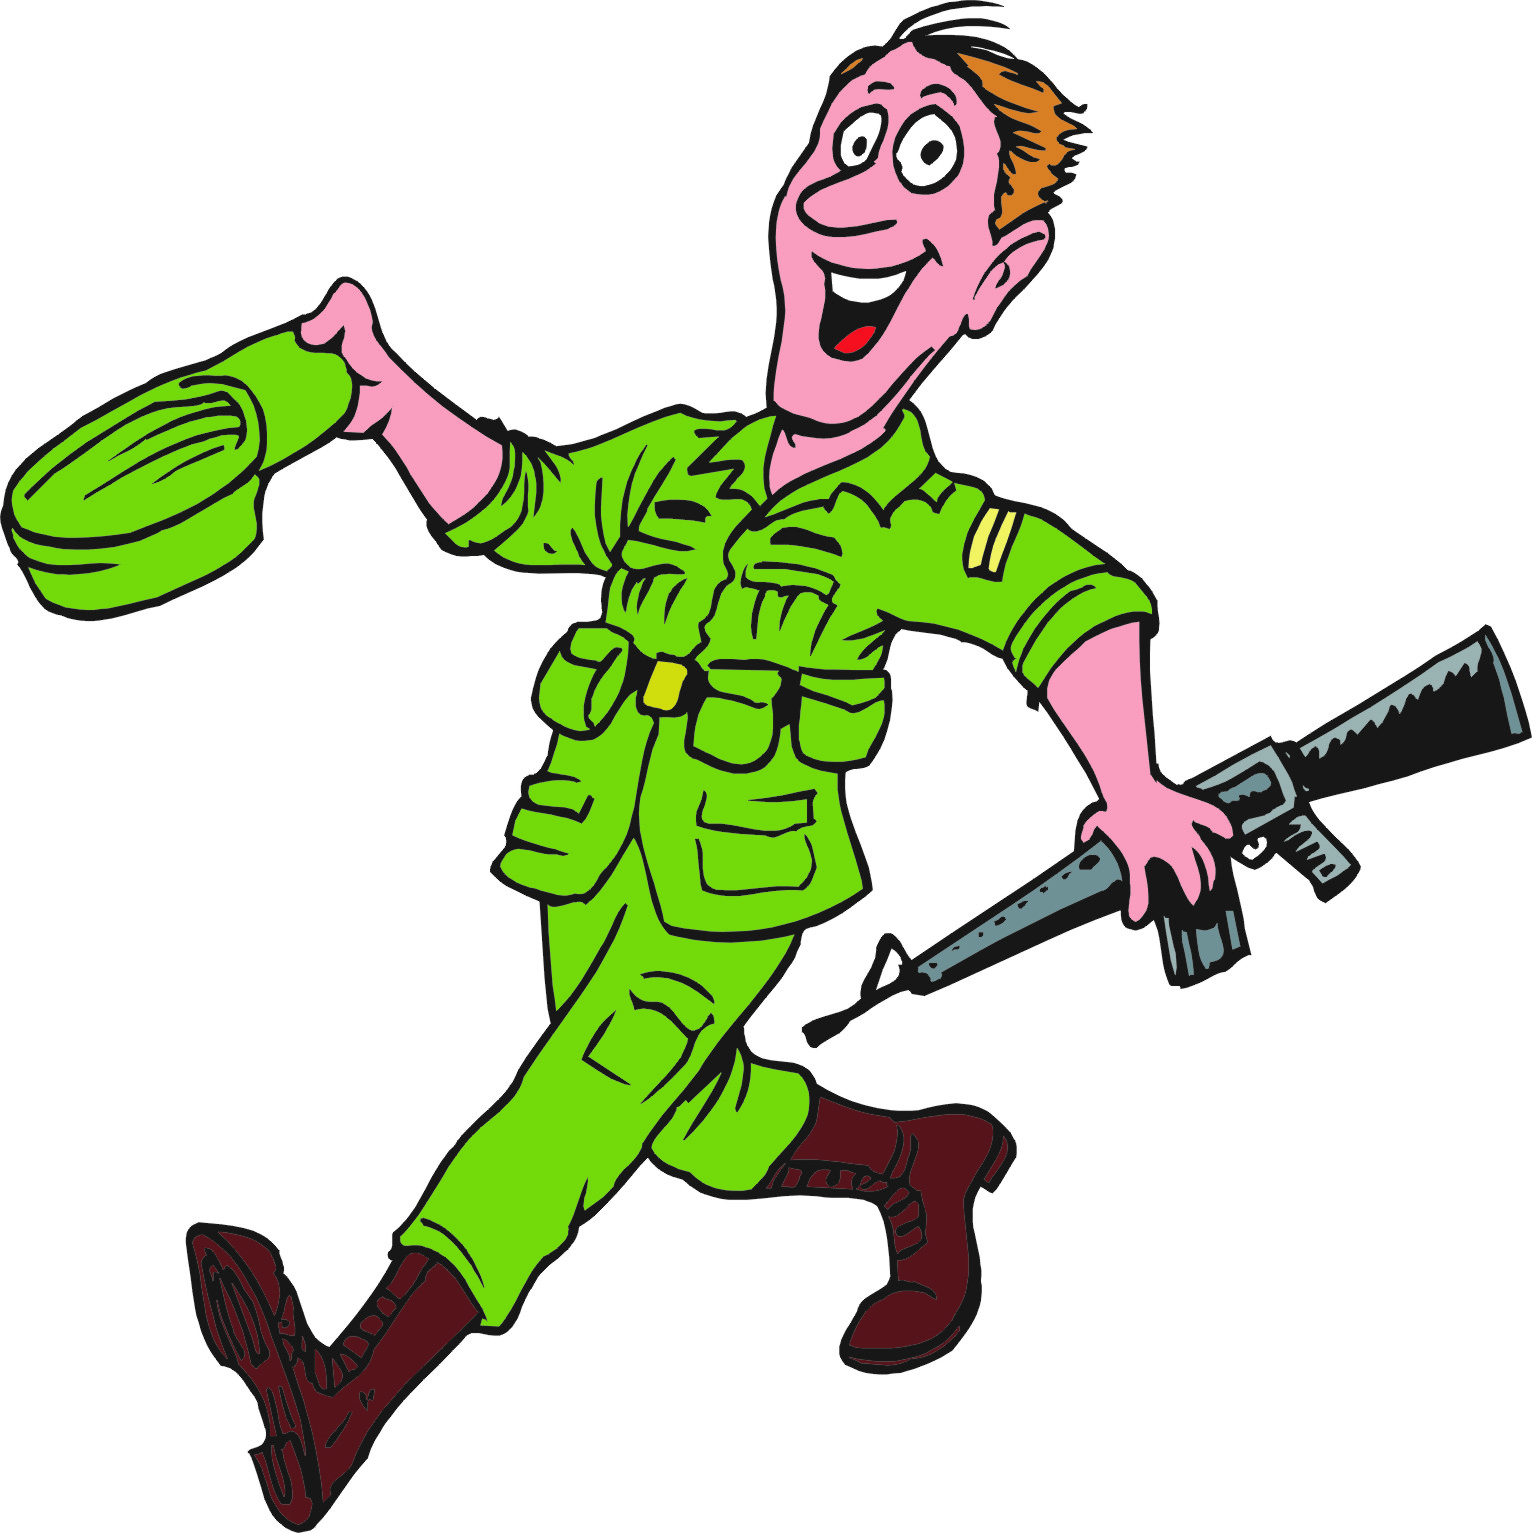 Army Coloring Pages for Boys